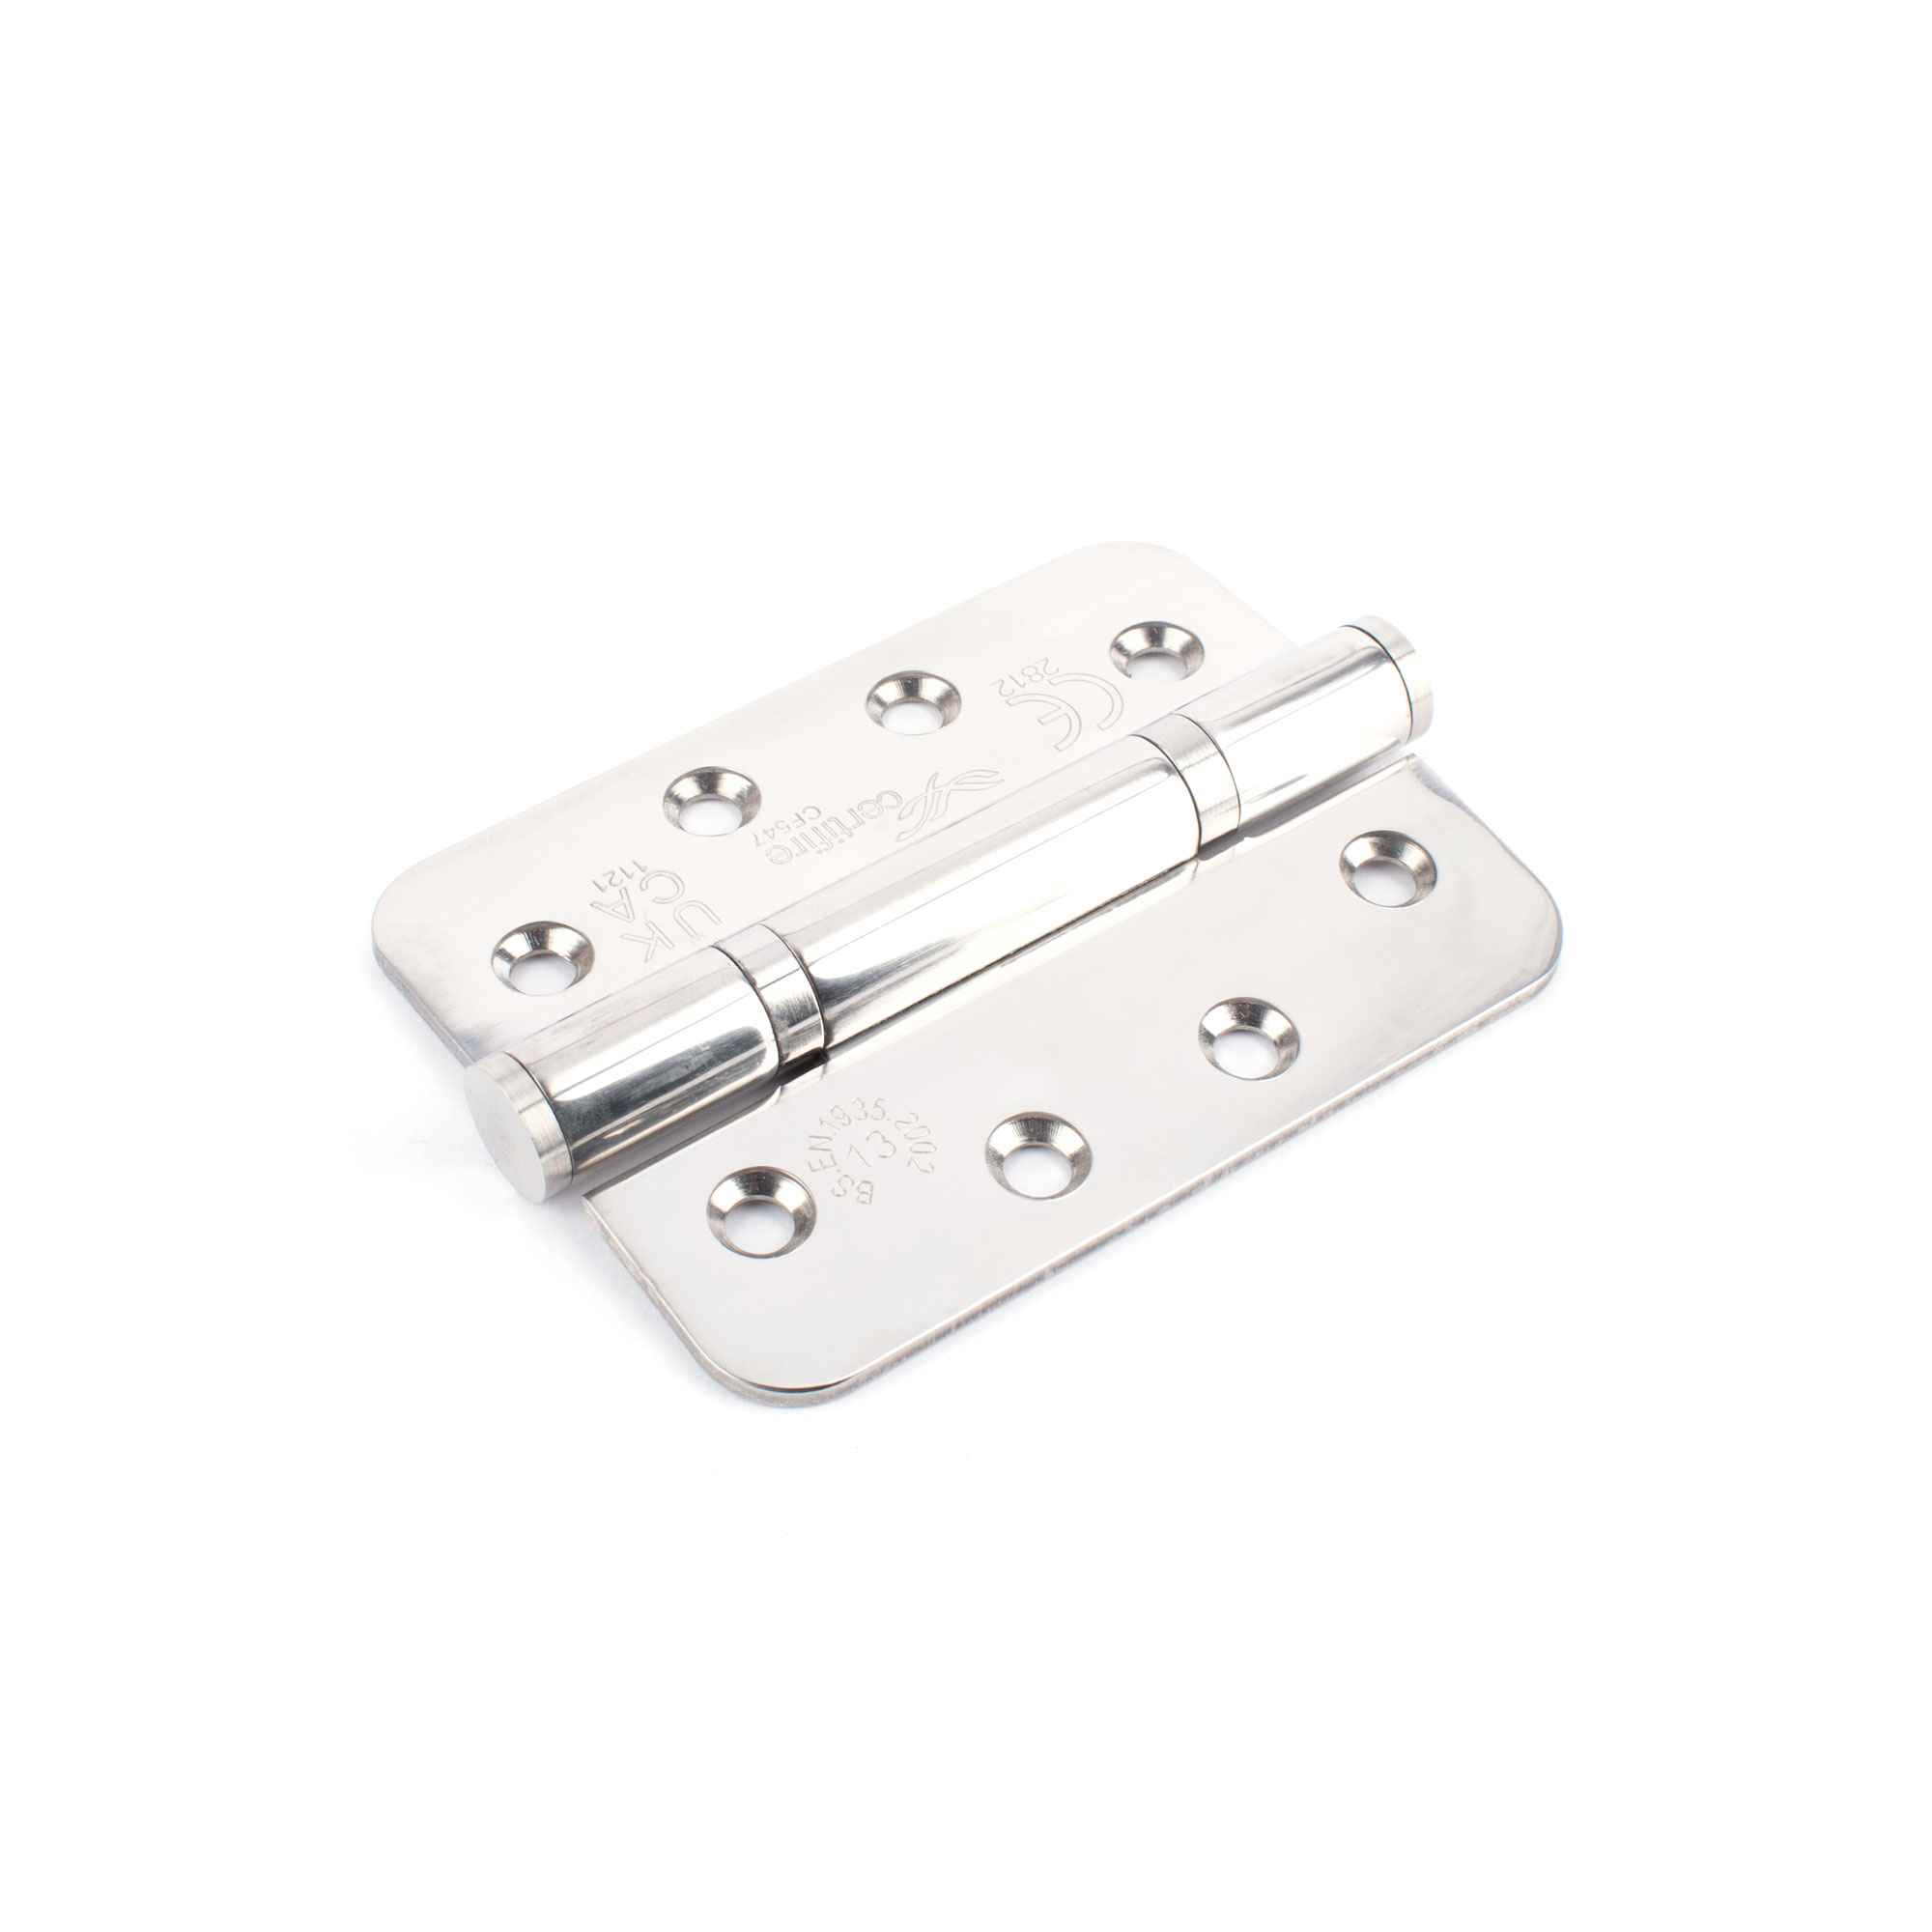 Sox Atom 4 Inch Stainless Steel Hinges Radius Edge (3 Pack) - Polished Stainless Steel